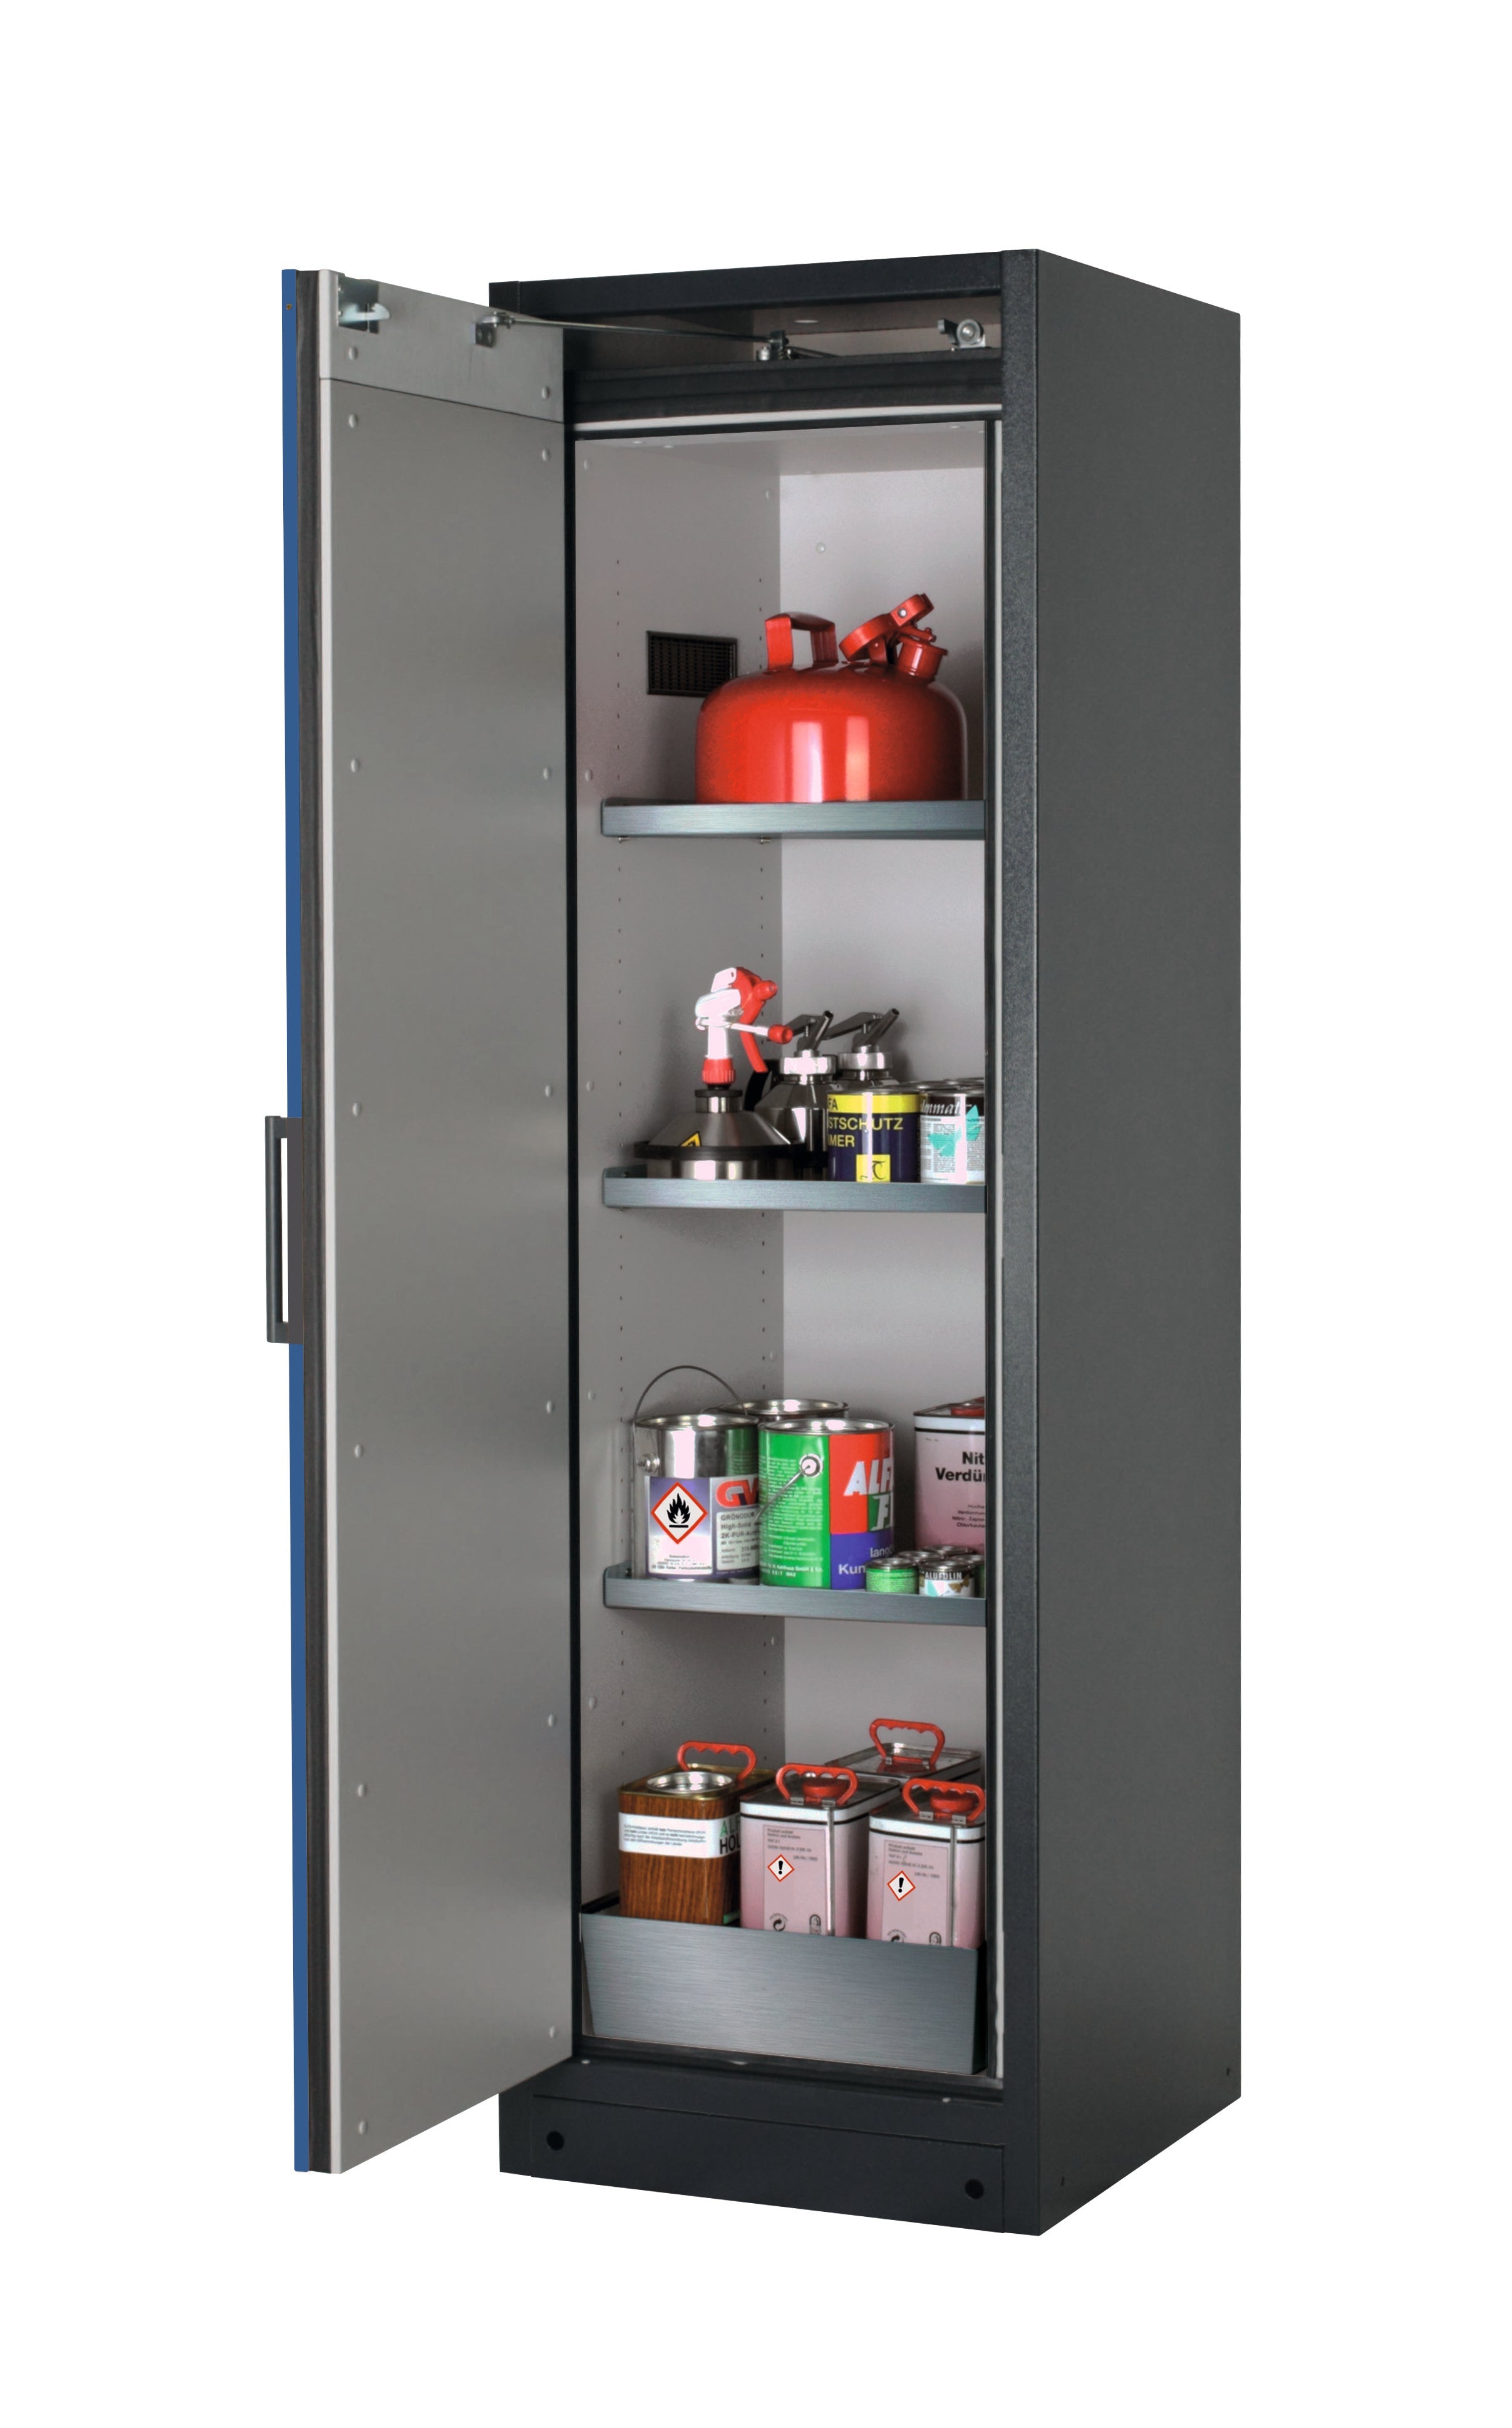 Type 90 safety storage cabinet Q-PEGASUS-90 model Q90.195.060.WDAC in gentian blue RAL 5010 with 3x shelf standard (stainless steel 1.4301),